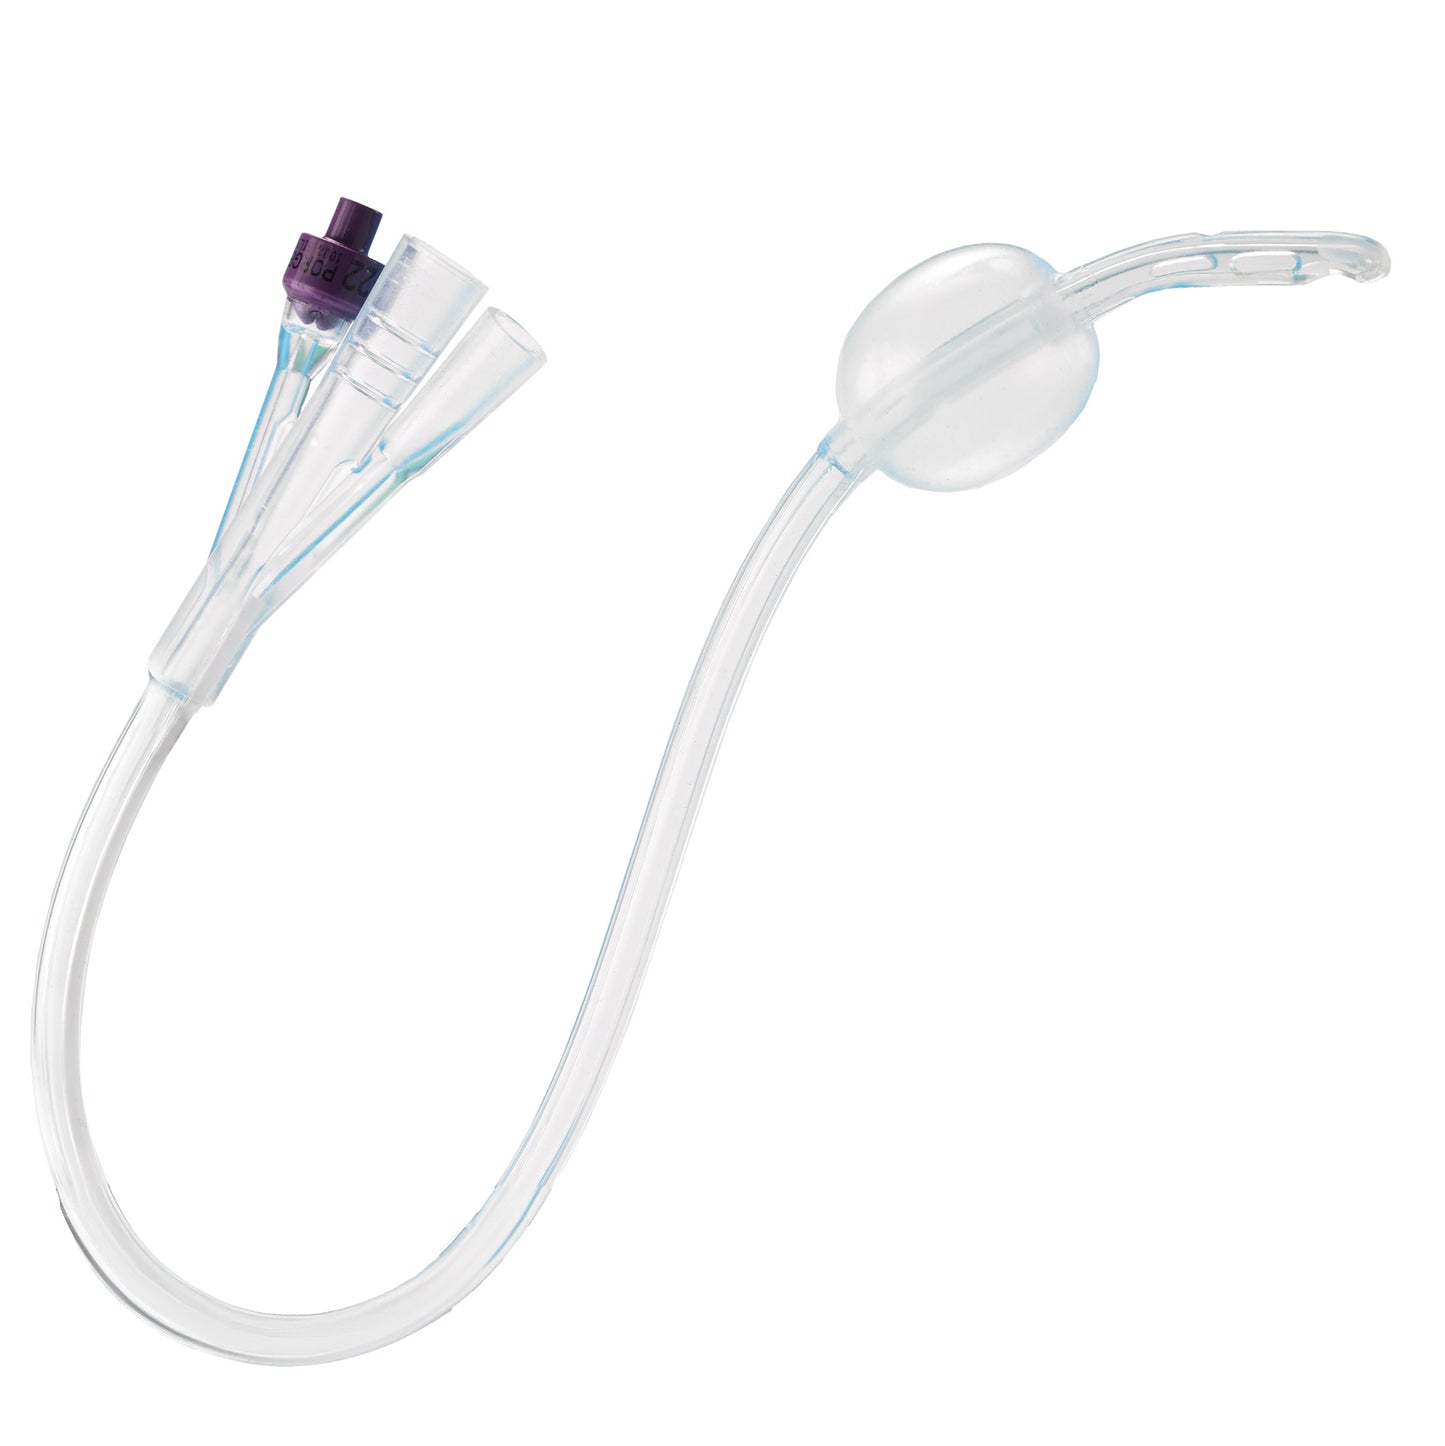 Coloplast X-Flow 3-way Silicone Dufour Tip Catheter (Box 5)